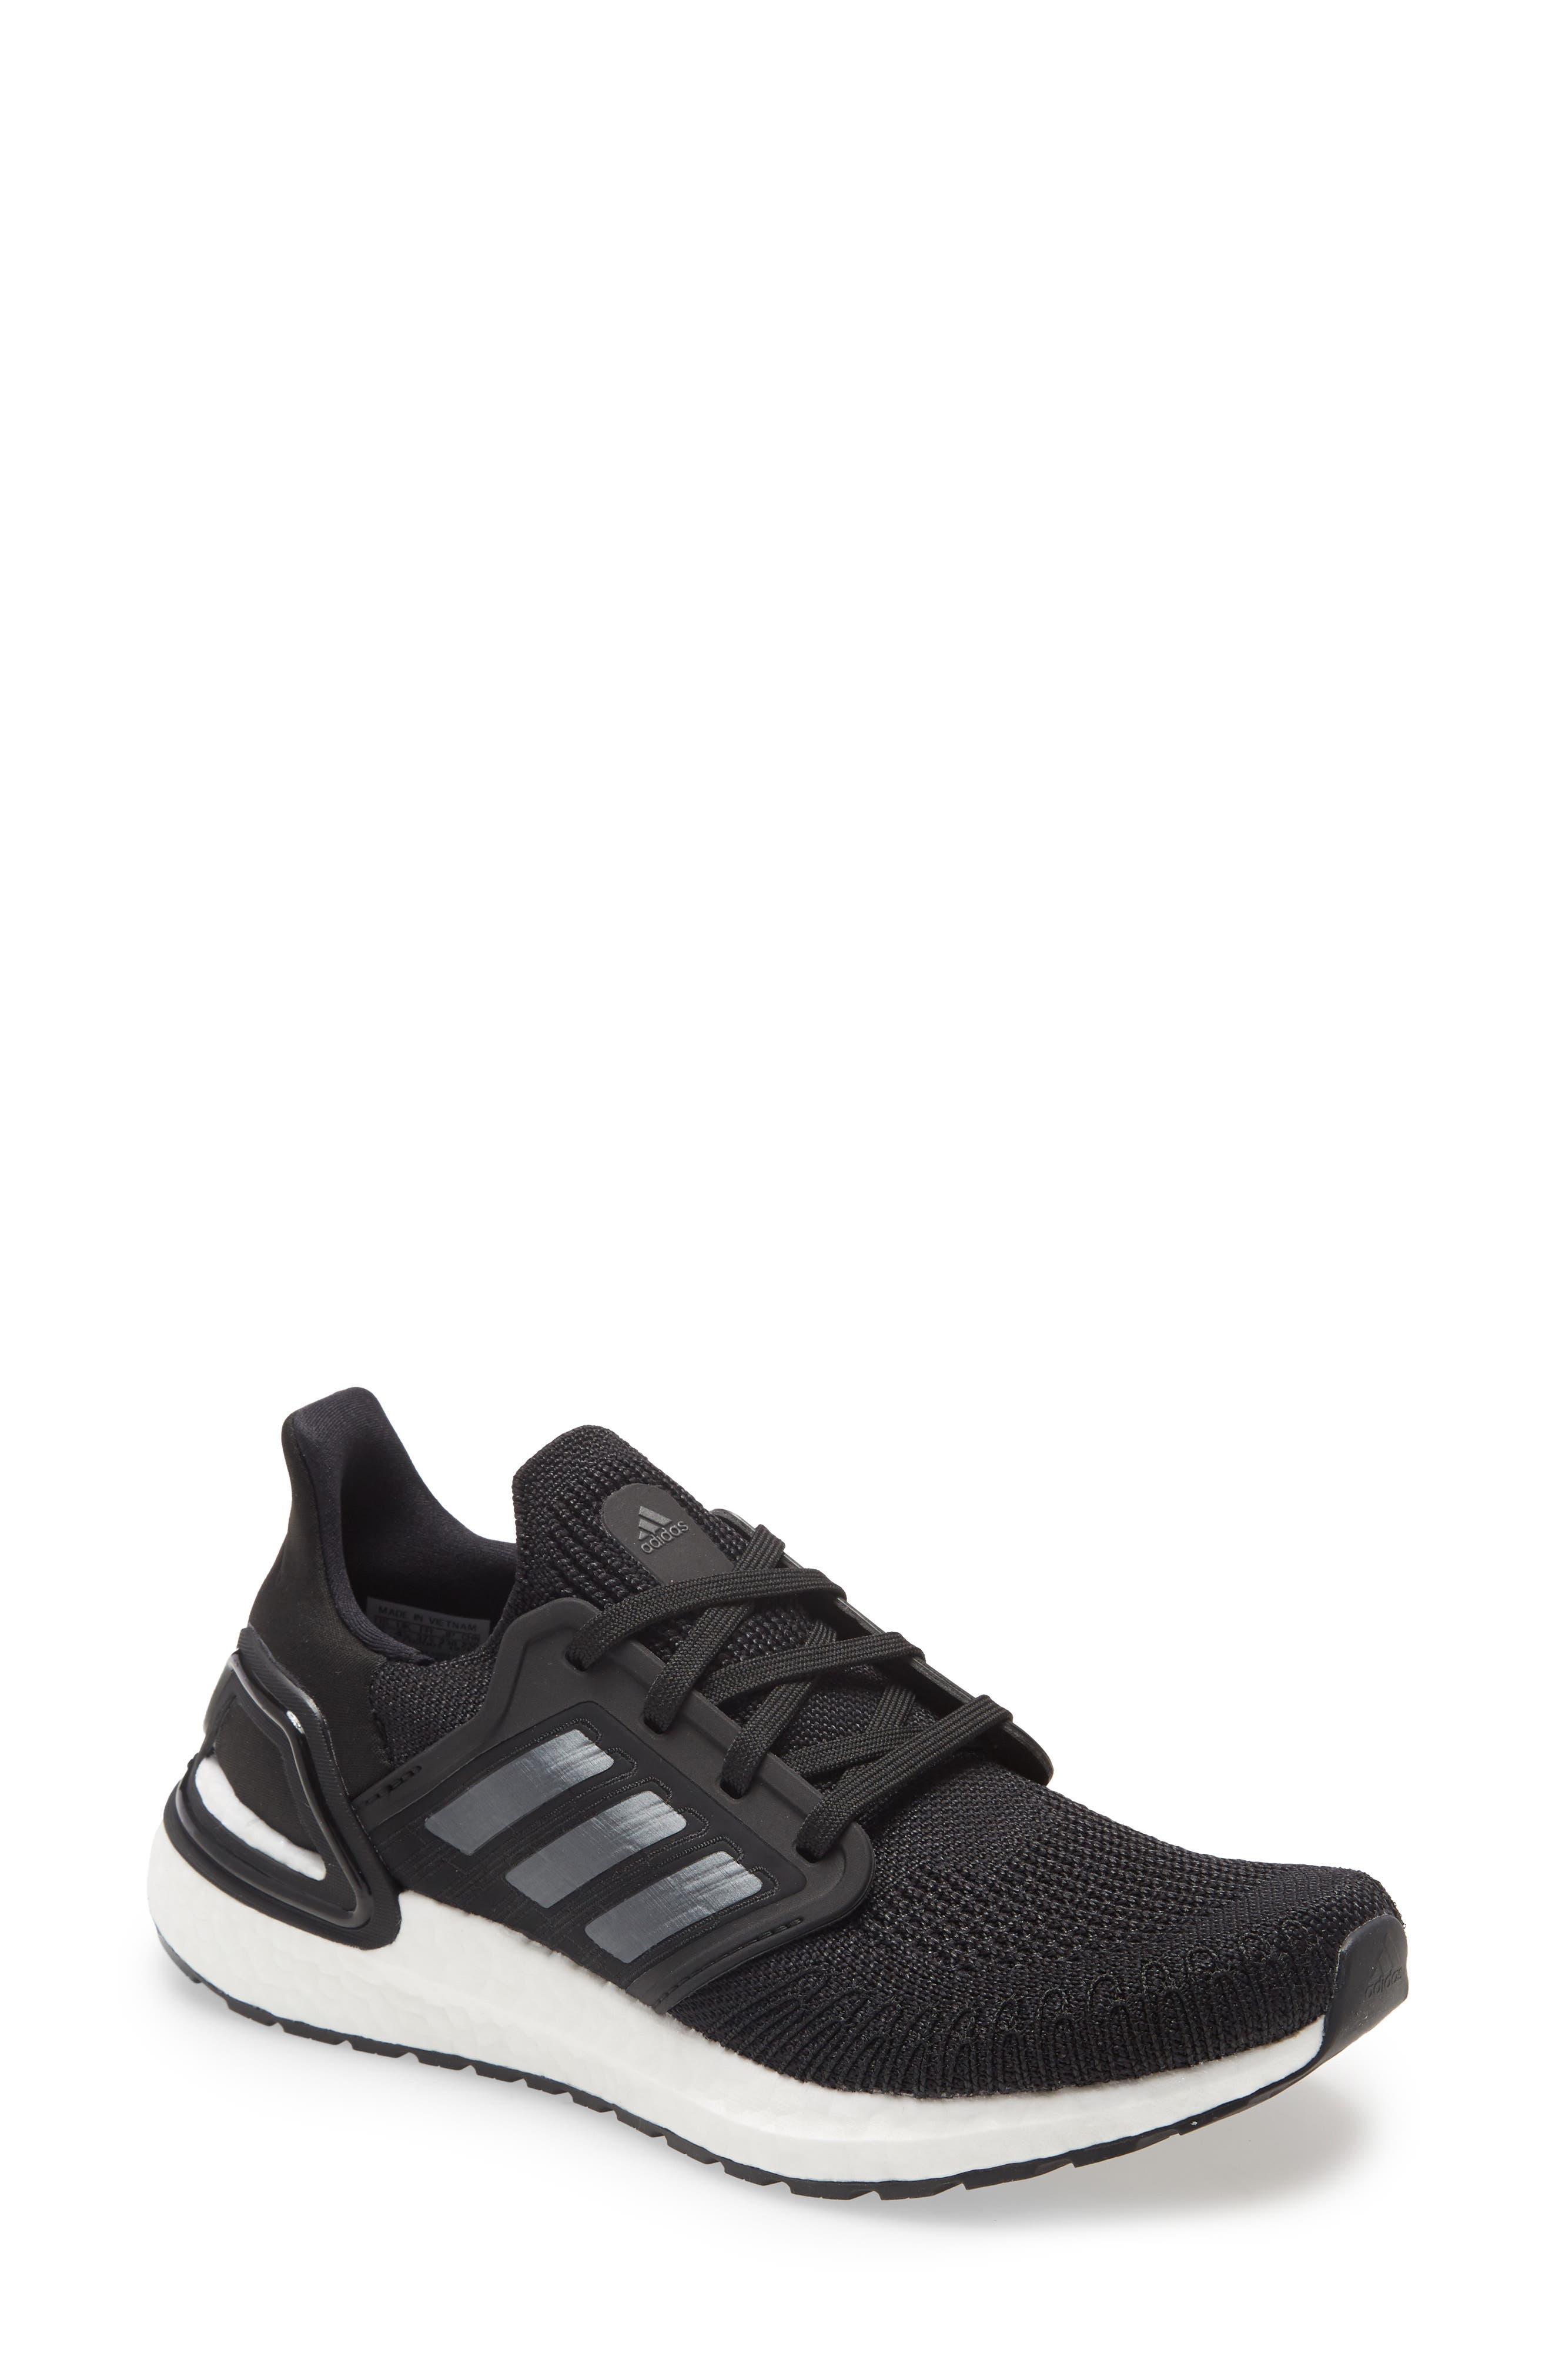 nordstrom womens adidas ultra boost